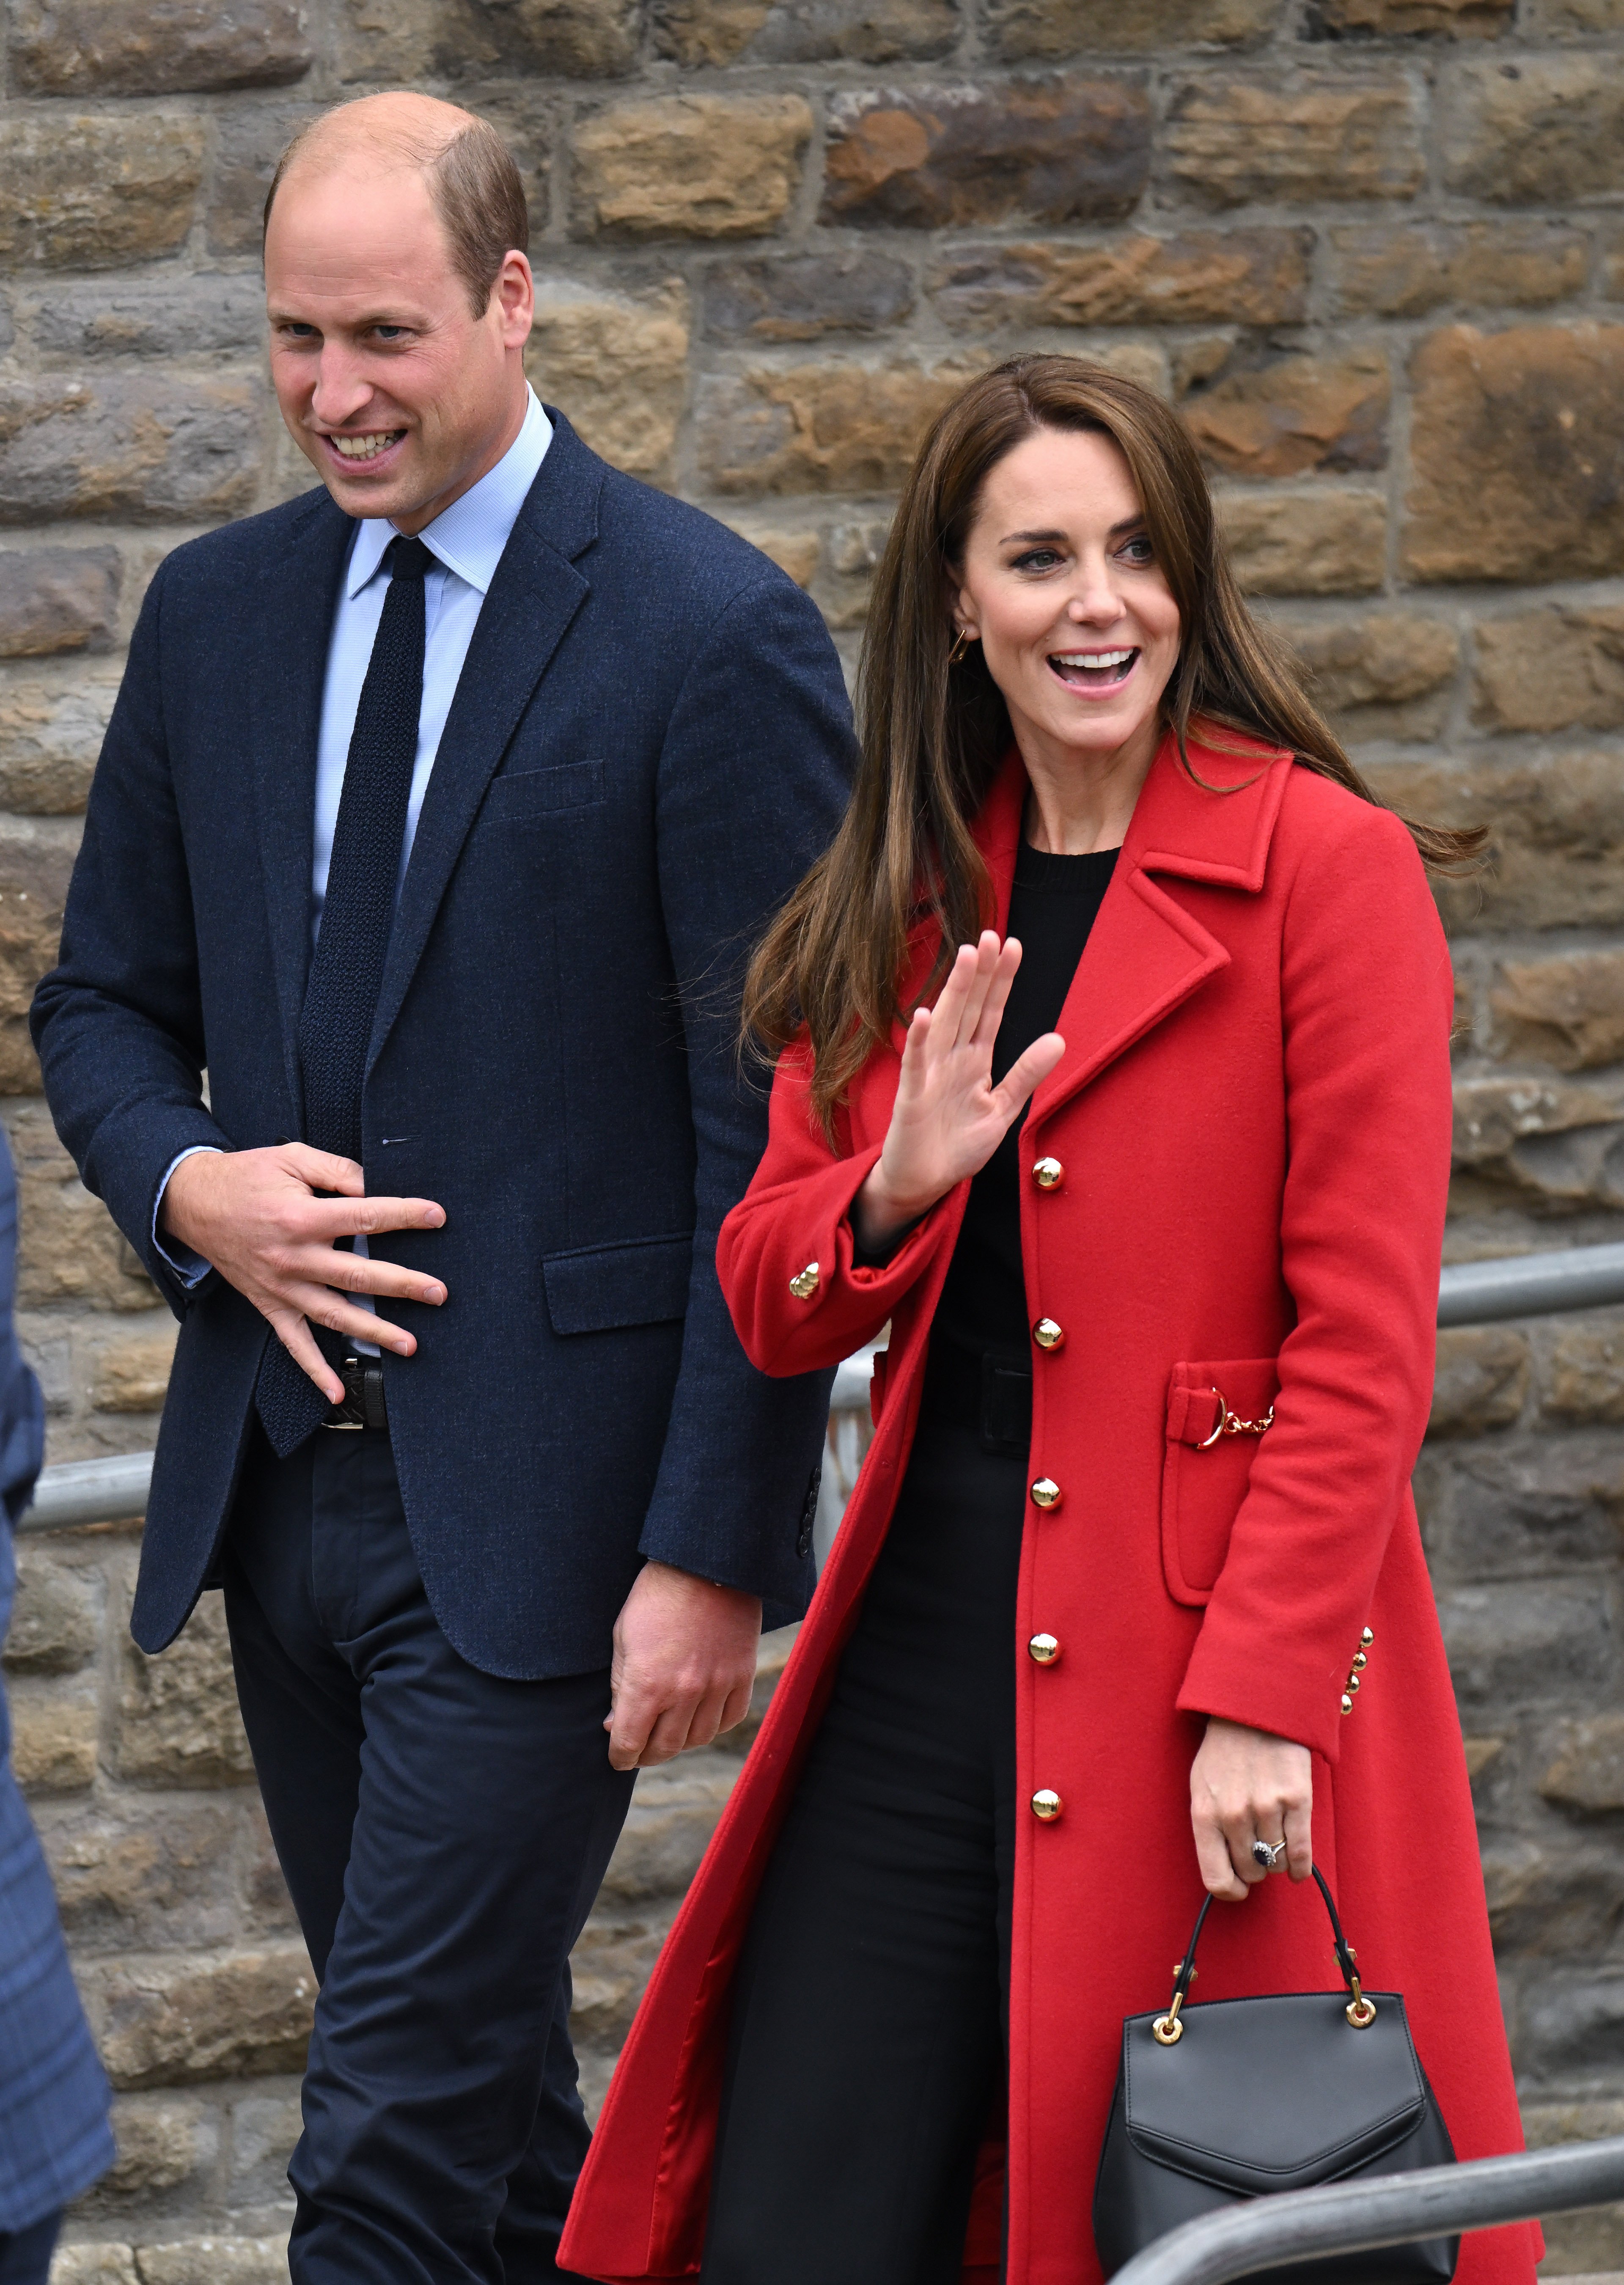 Prince William, Prince of Wales and Catherine, Princess of Wlales during their visit to Wales on September 27, 2022 in Swansea, Wales. | Source: Getty Images